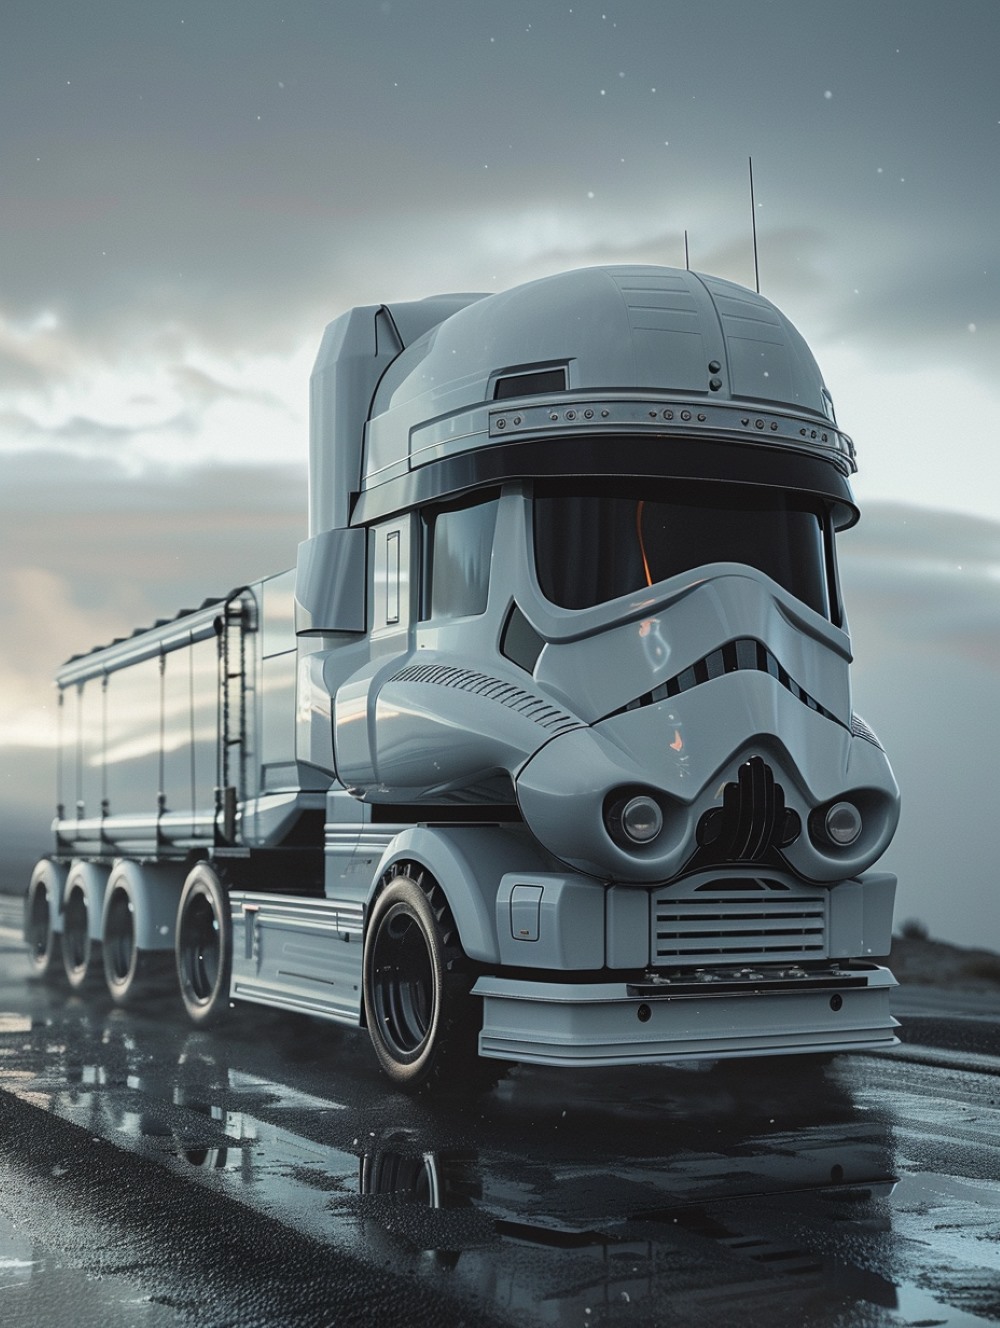 the heavy goods carrier truck with a cabin shaped like a Stormtrooper helmet